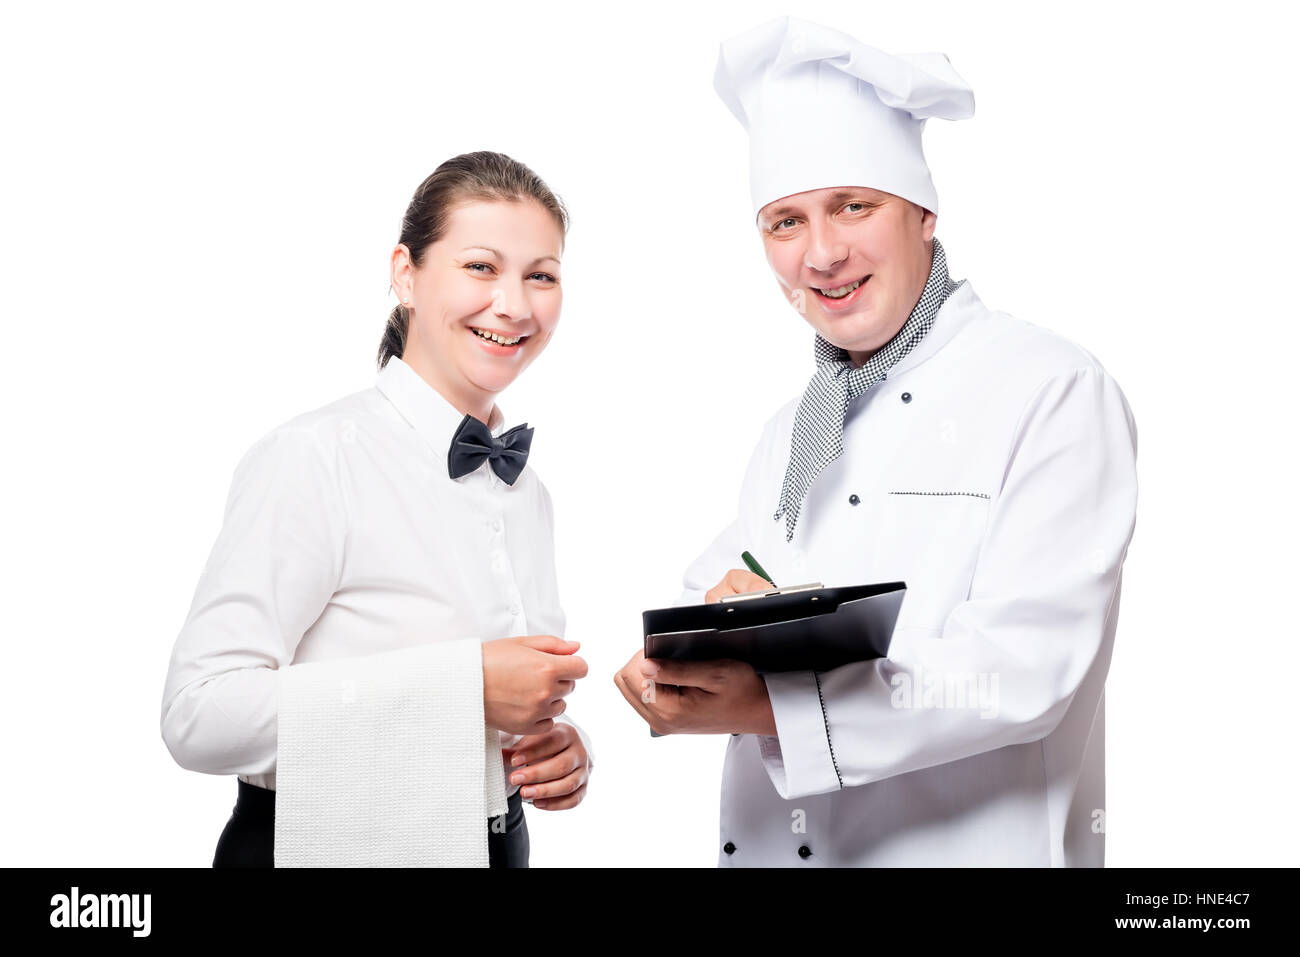 Chef with a folder and a waiter with a towel smiling on a white background in the studio Stock Photo